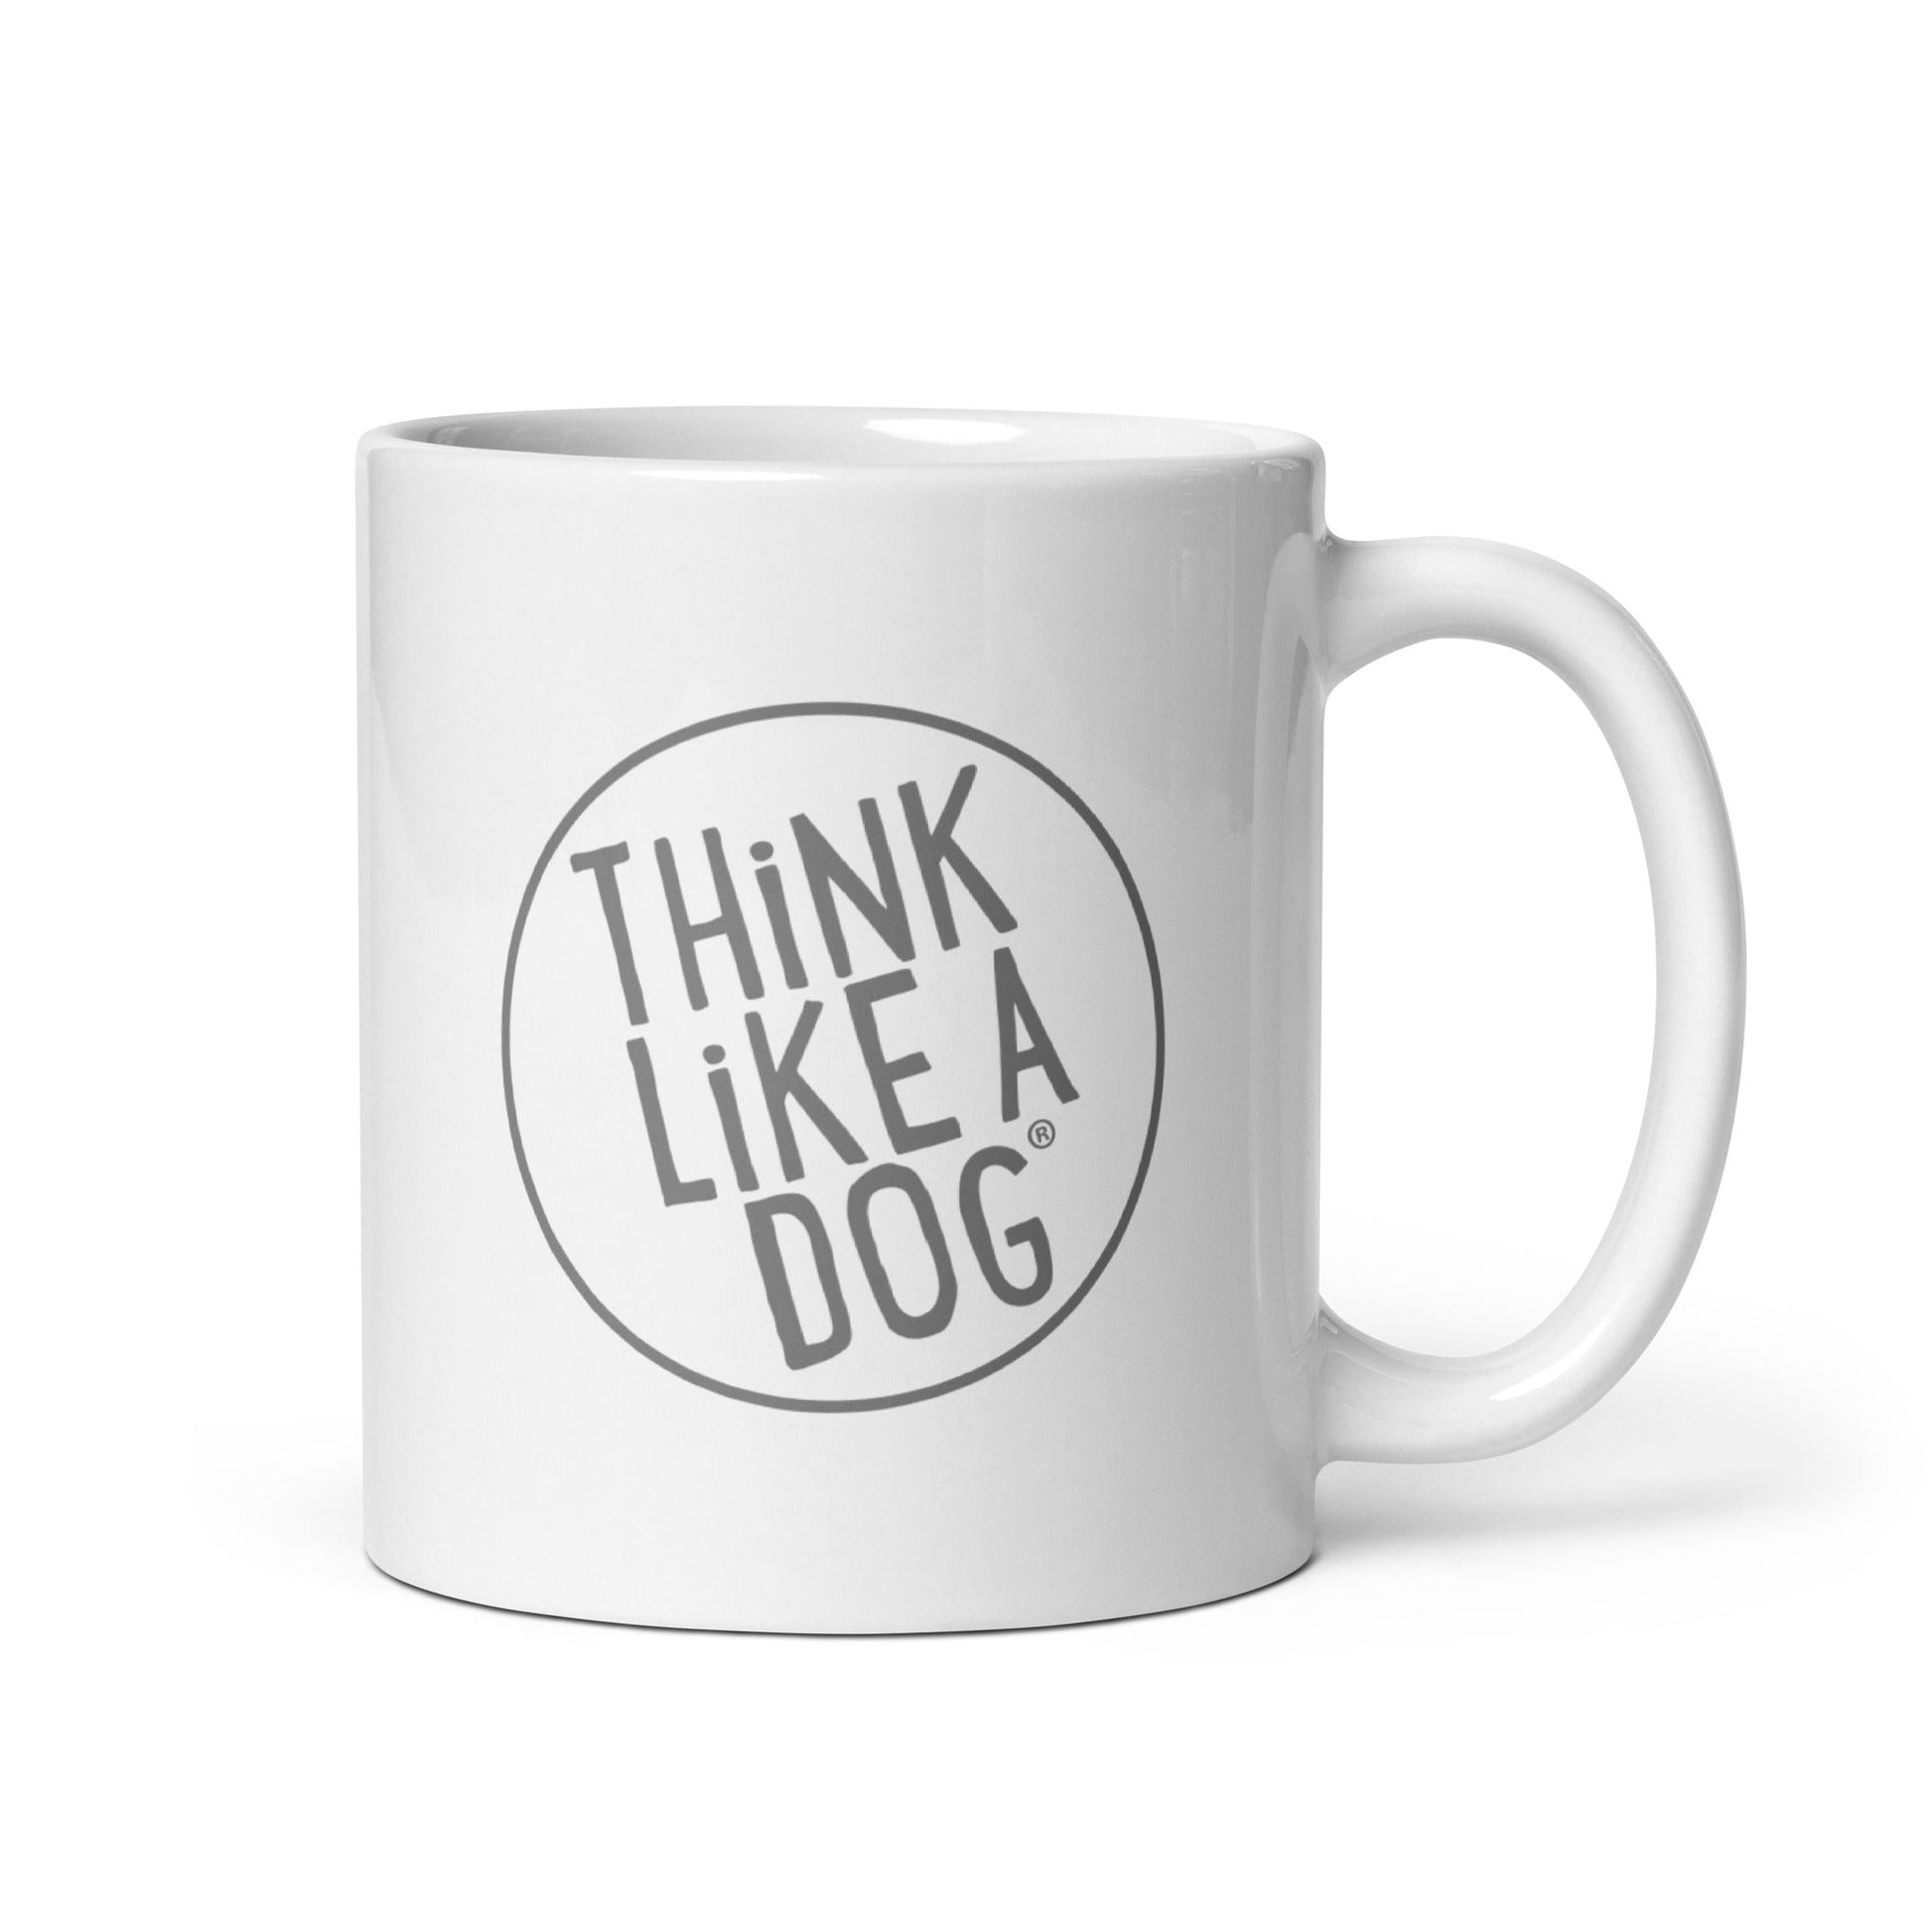 White glossy mug with the phrase "Think Like a Dog" printed on it, perfect for dog lovers. - White Glossy Mug Grey THiNK LiKE A DOG® Logo, perfect for dog lovers.